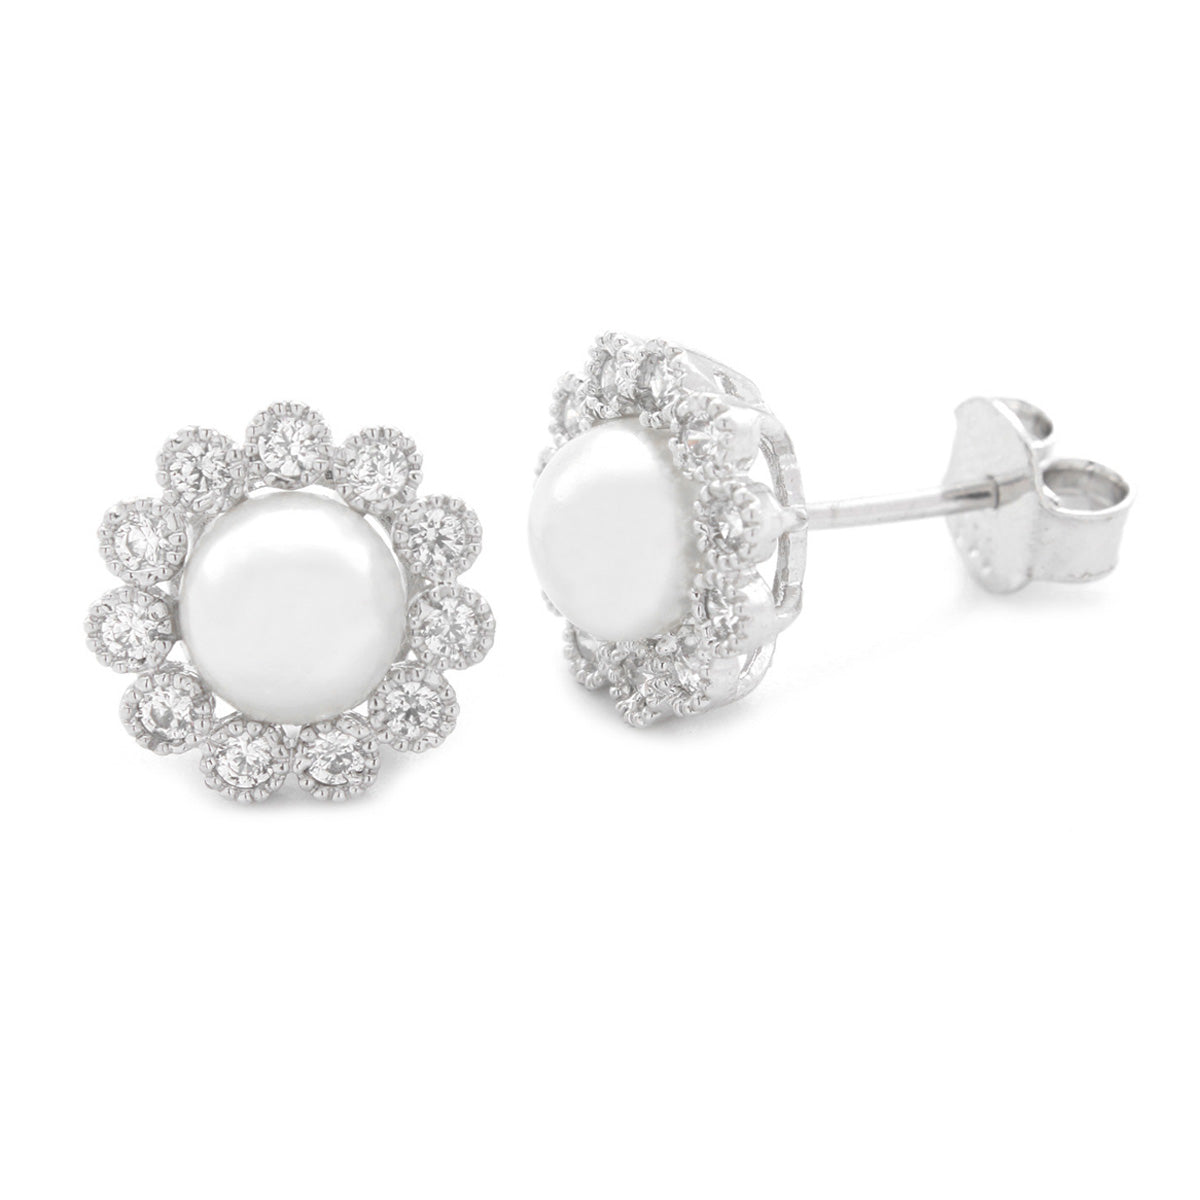 925 Sterling Silver Single Pearl Flower Shape With Stones Studded Earring For Girls And Women